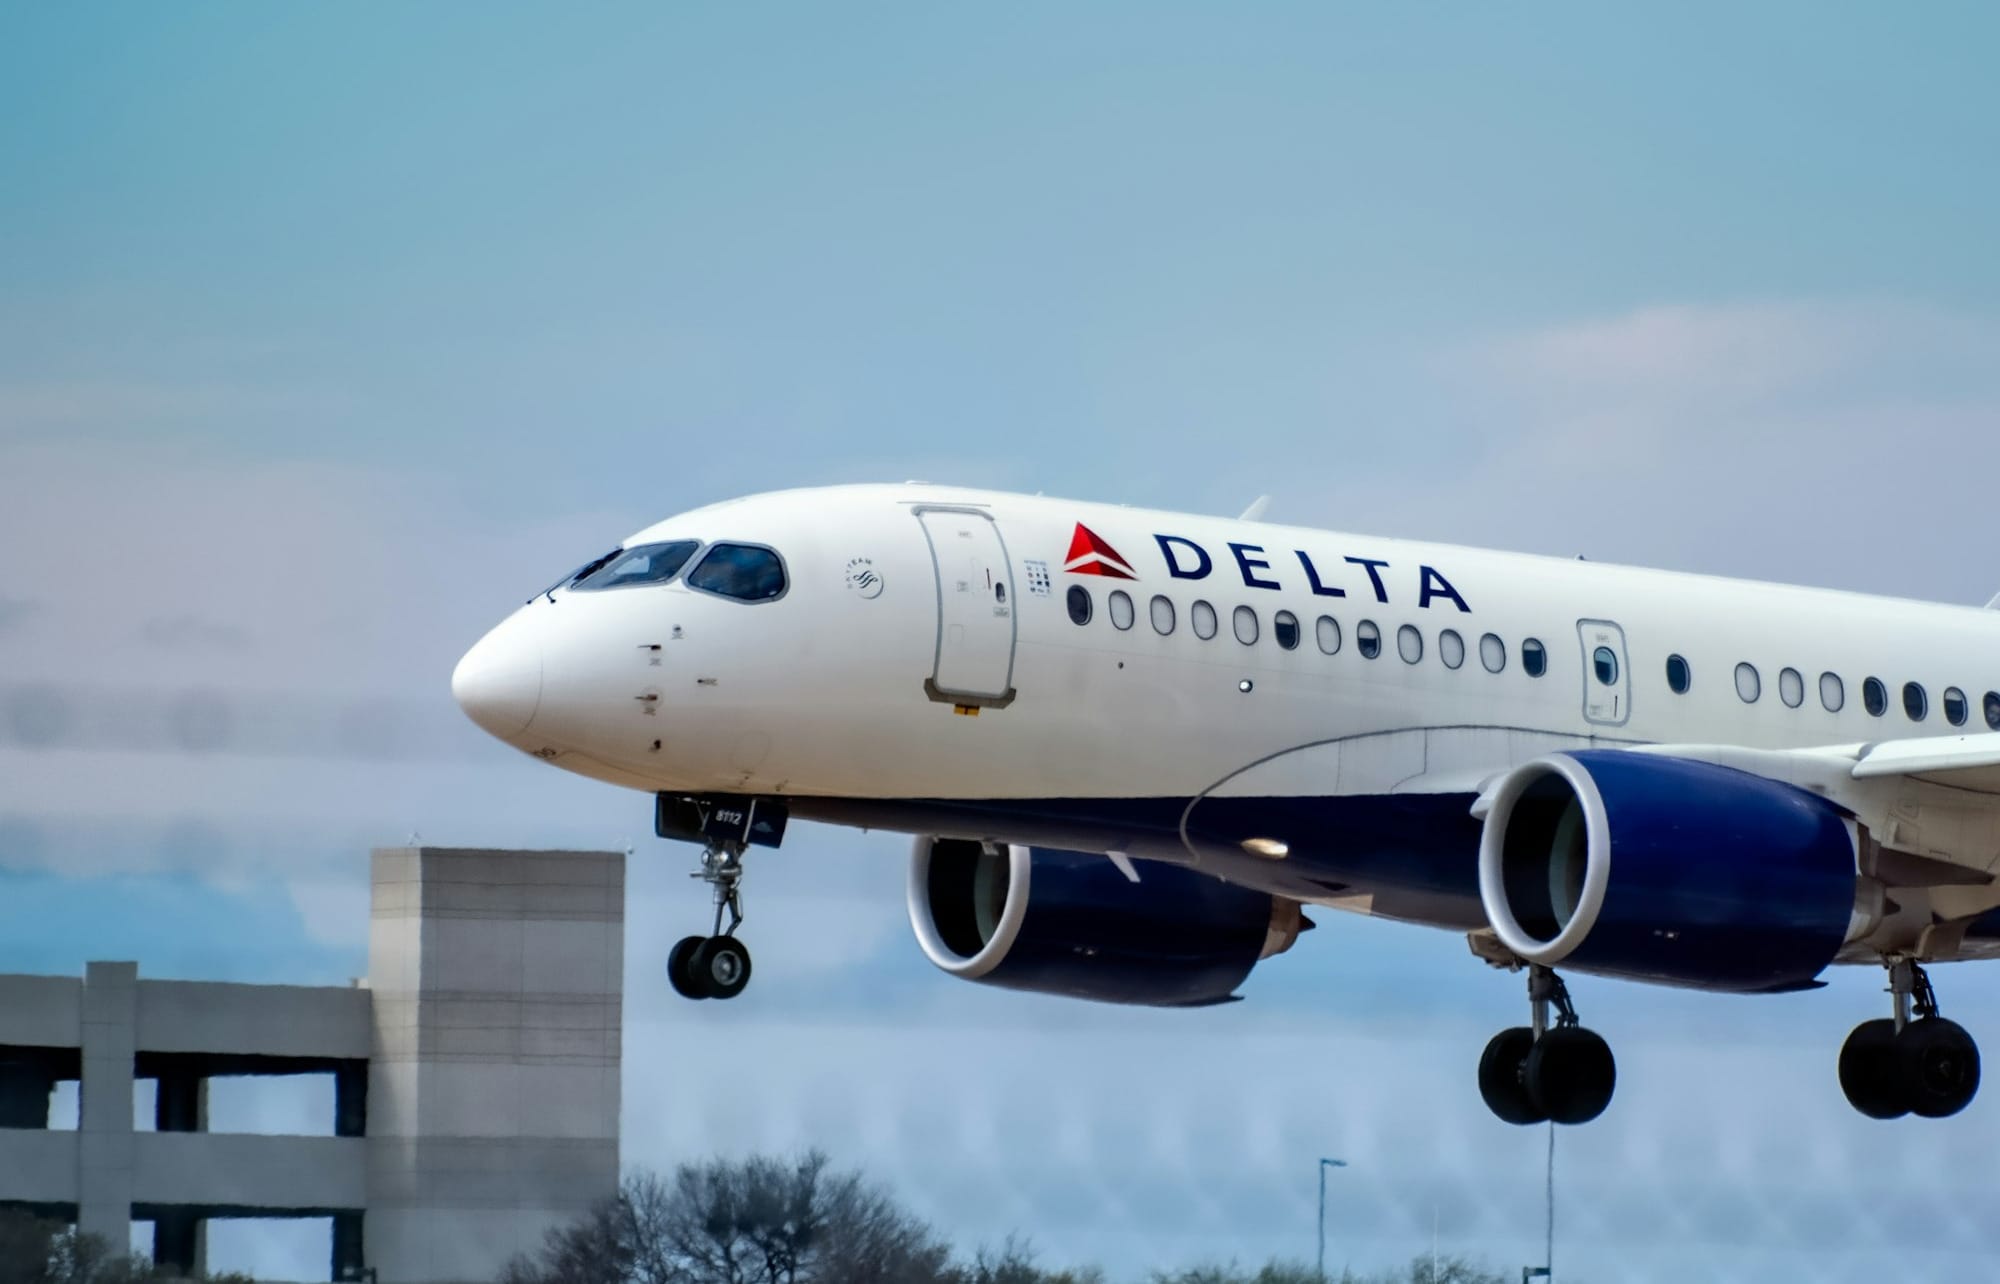 Delta Named Top U.S. Airline by Wall Street Journal for 2023